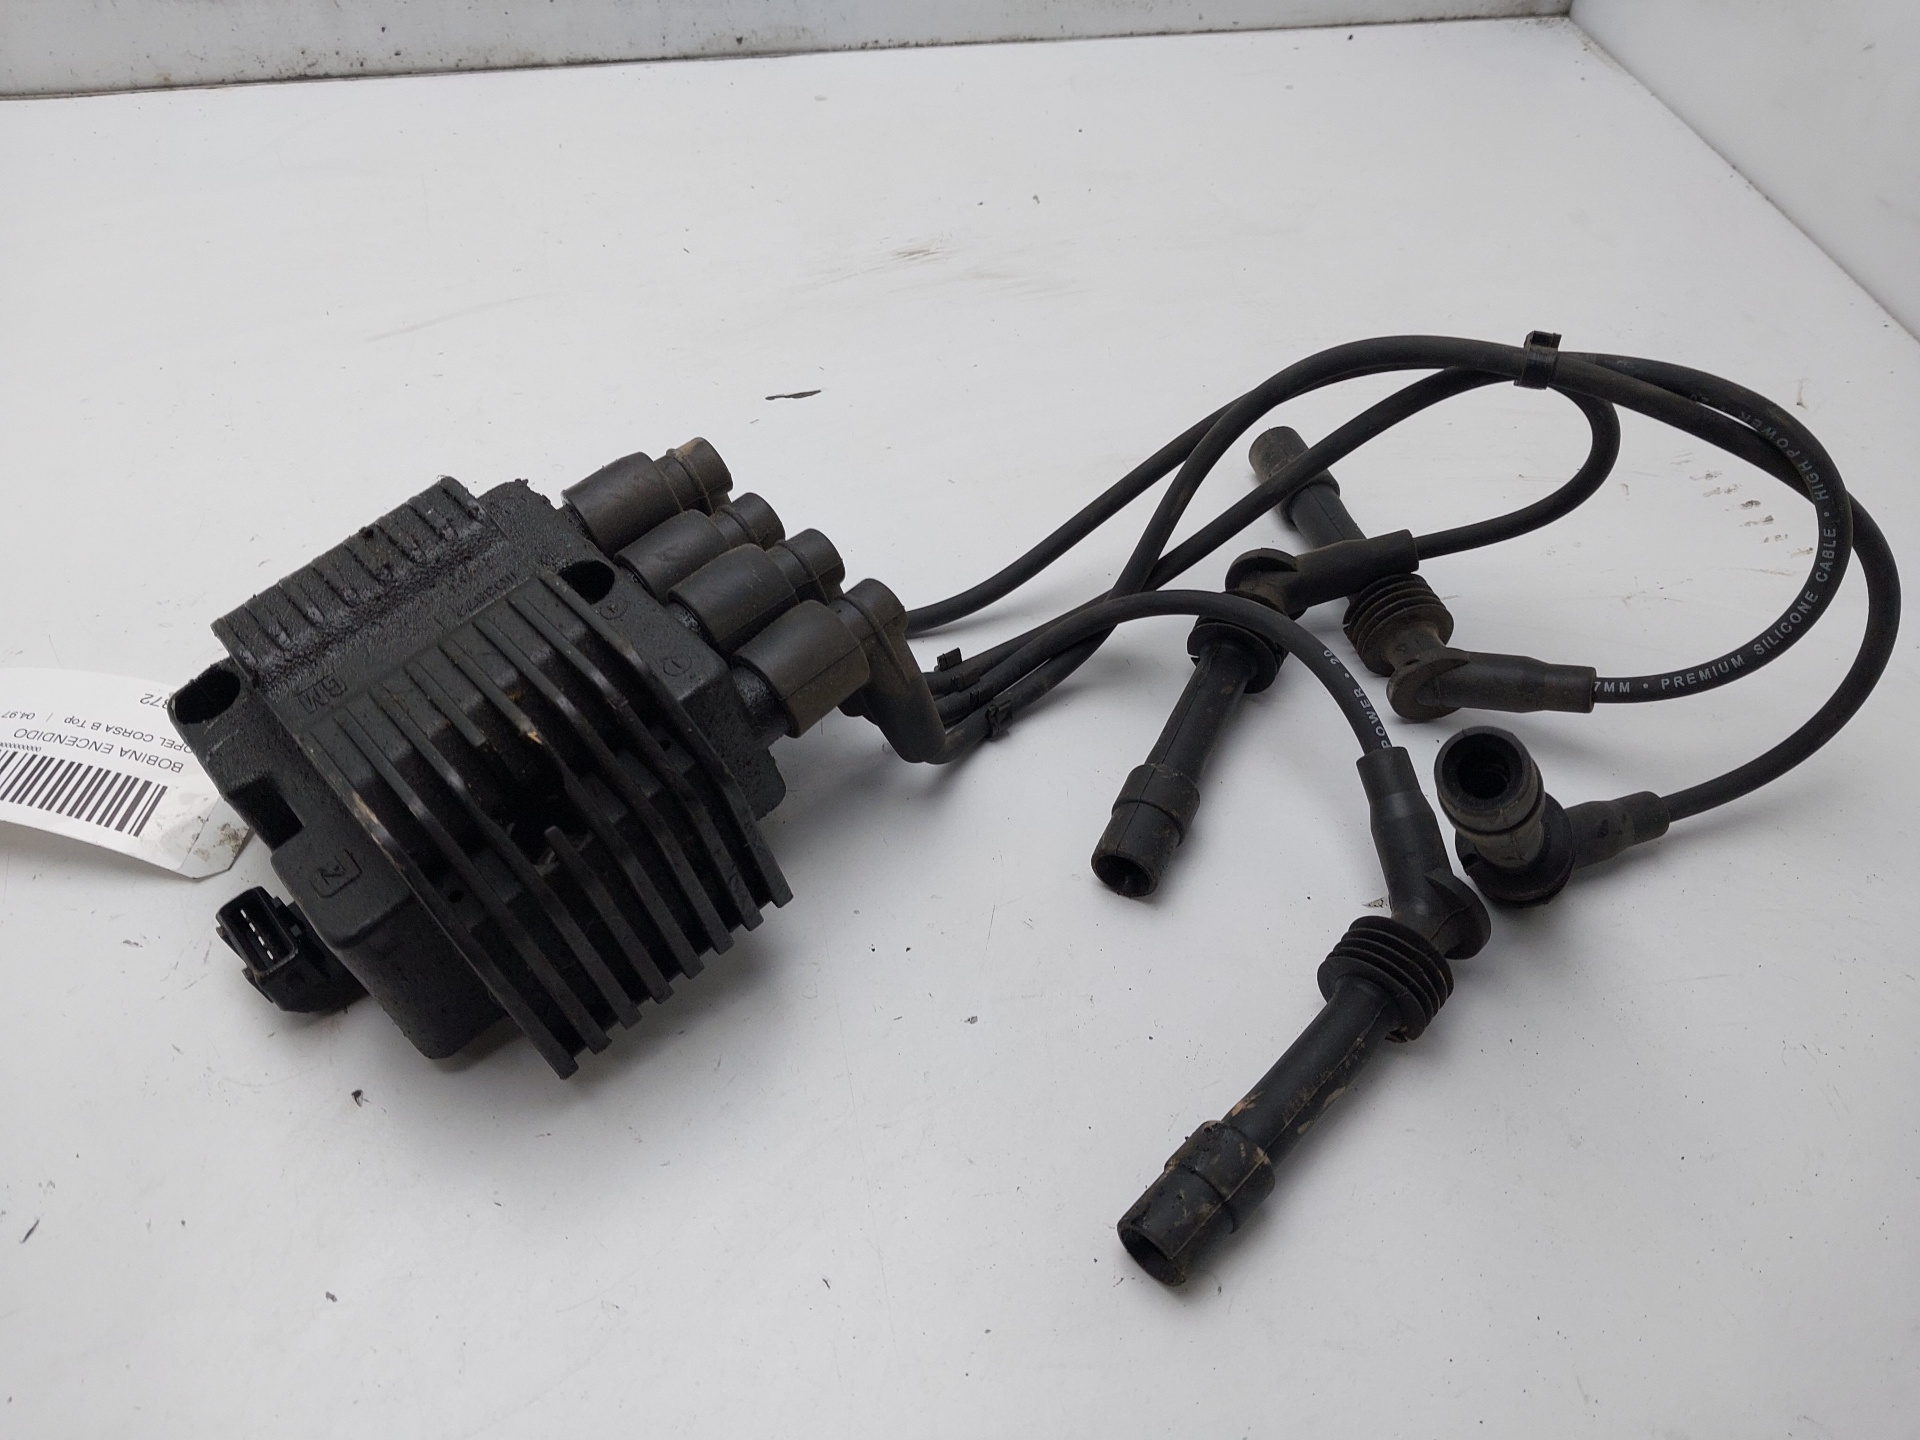 OPEL Corsa B (1993-2000) High Voltage Ignition Coil 1103872 24757955